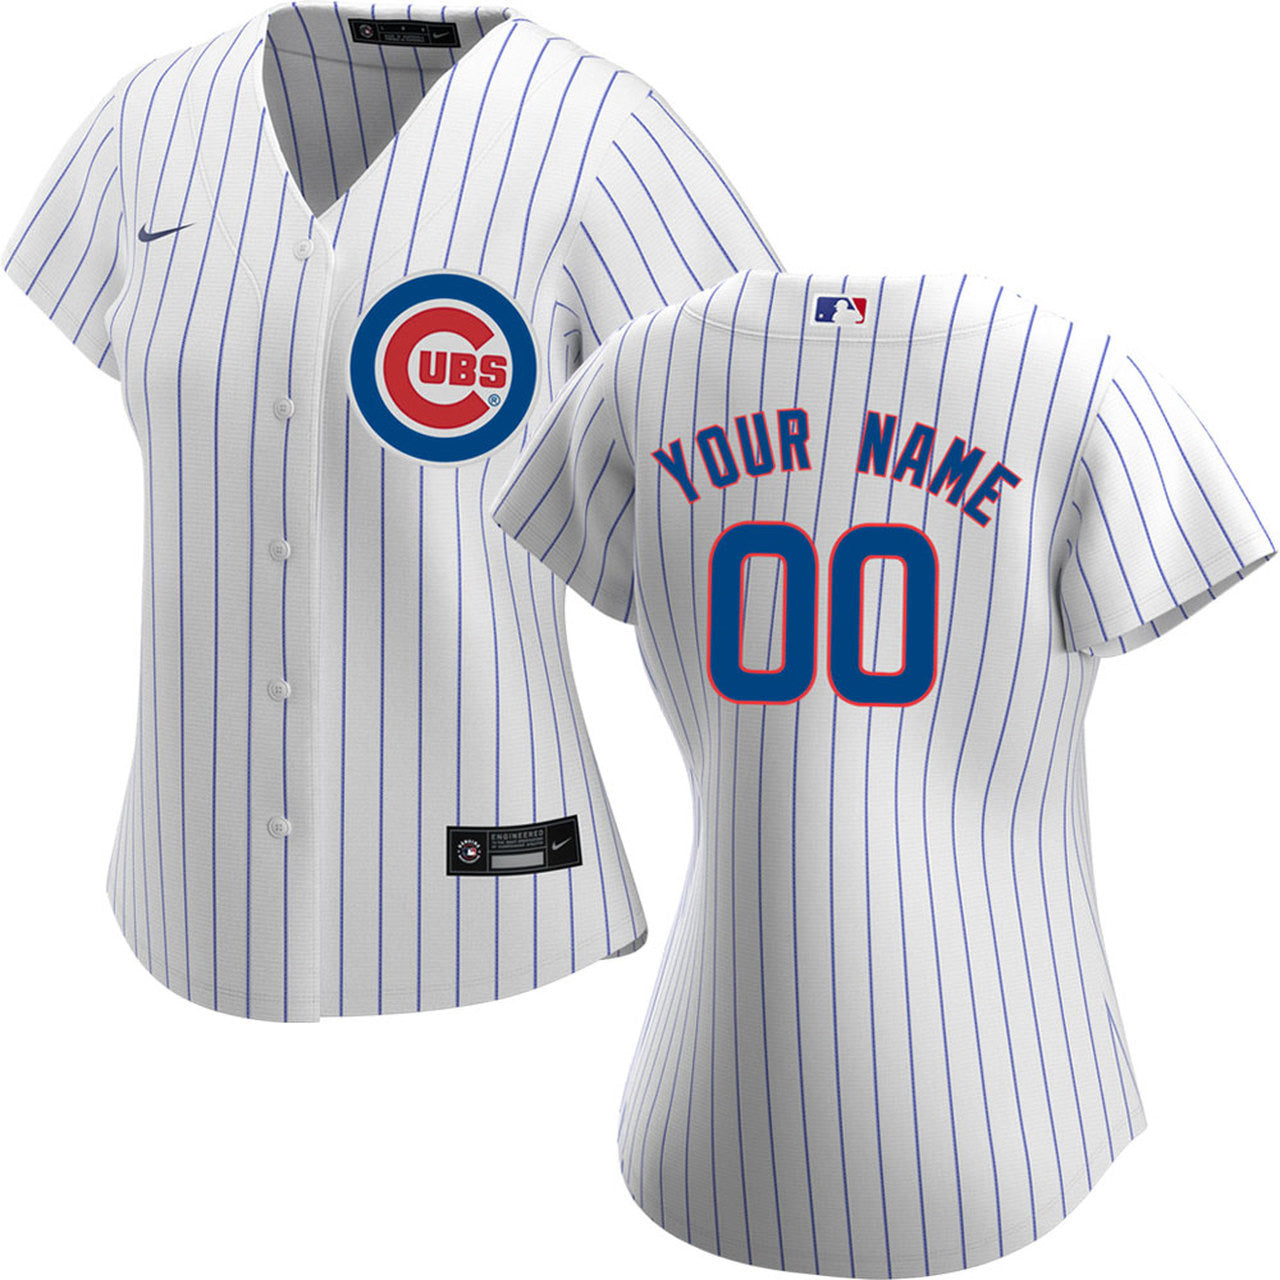 Nike MLB Chicago Cubs Official Replica Home Short Sleeve T-Shirt